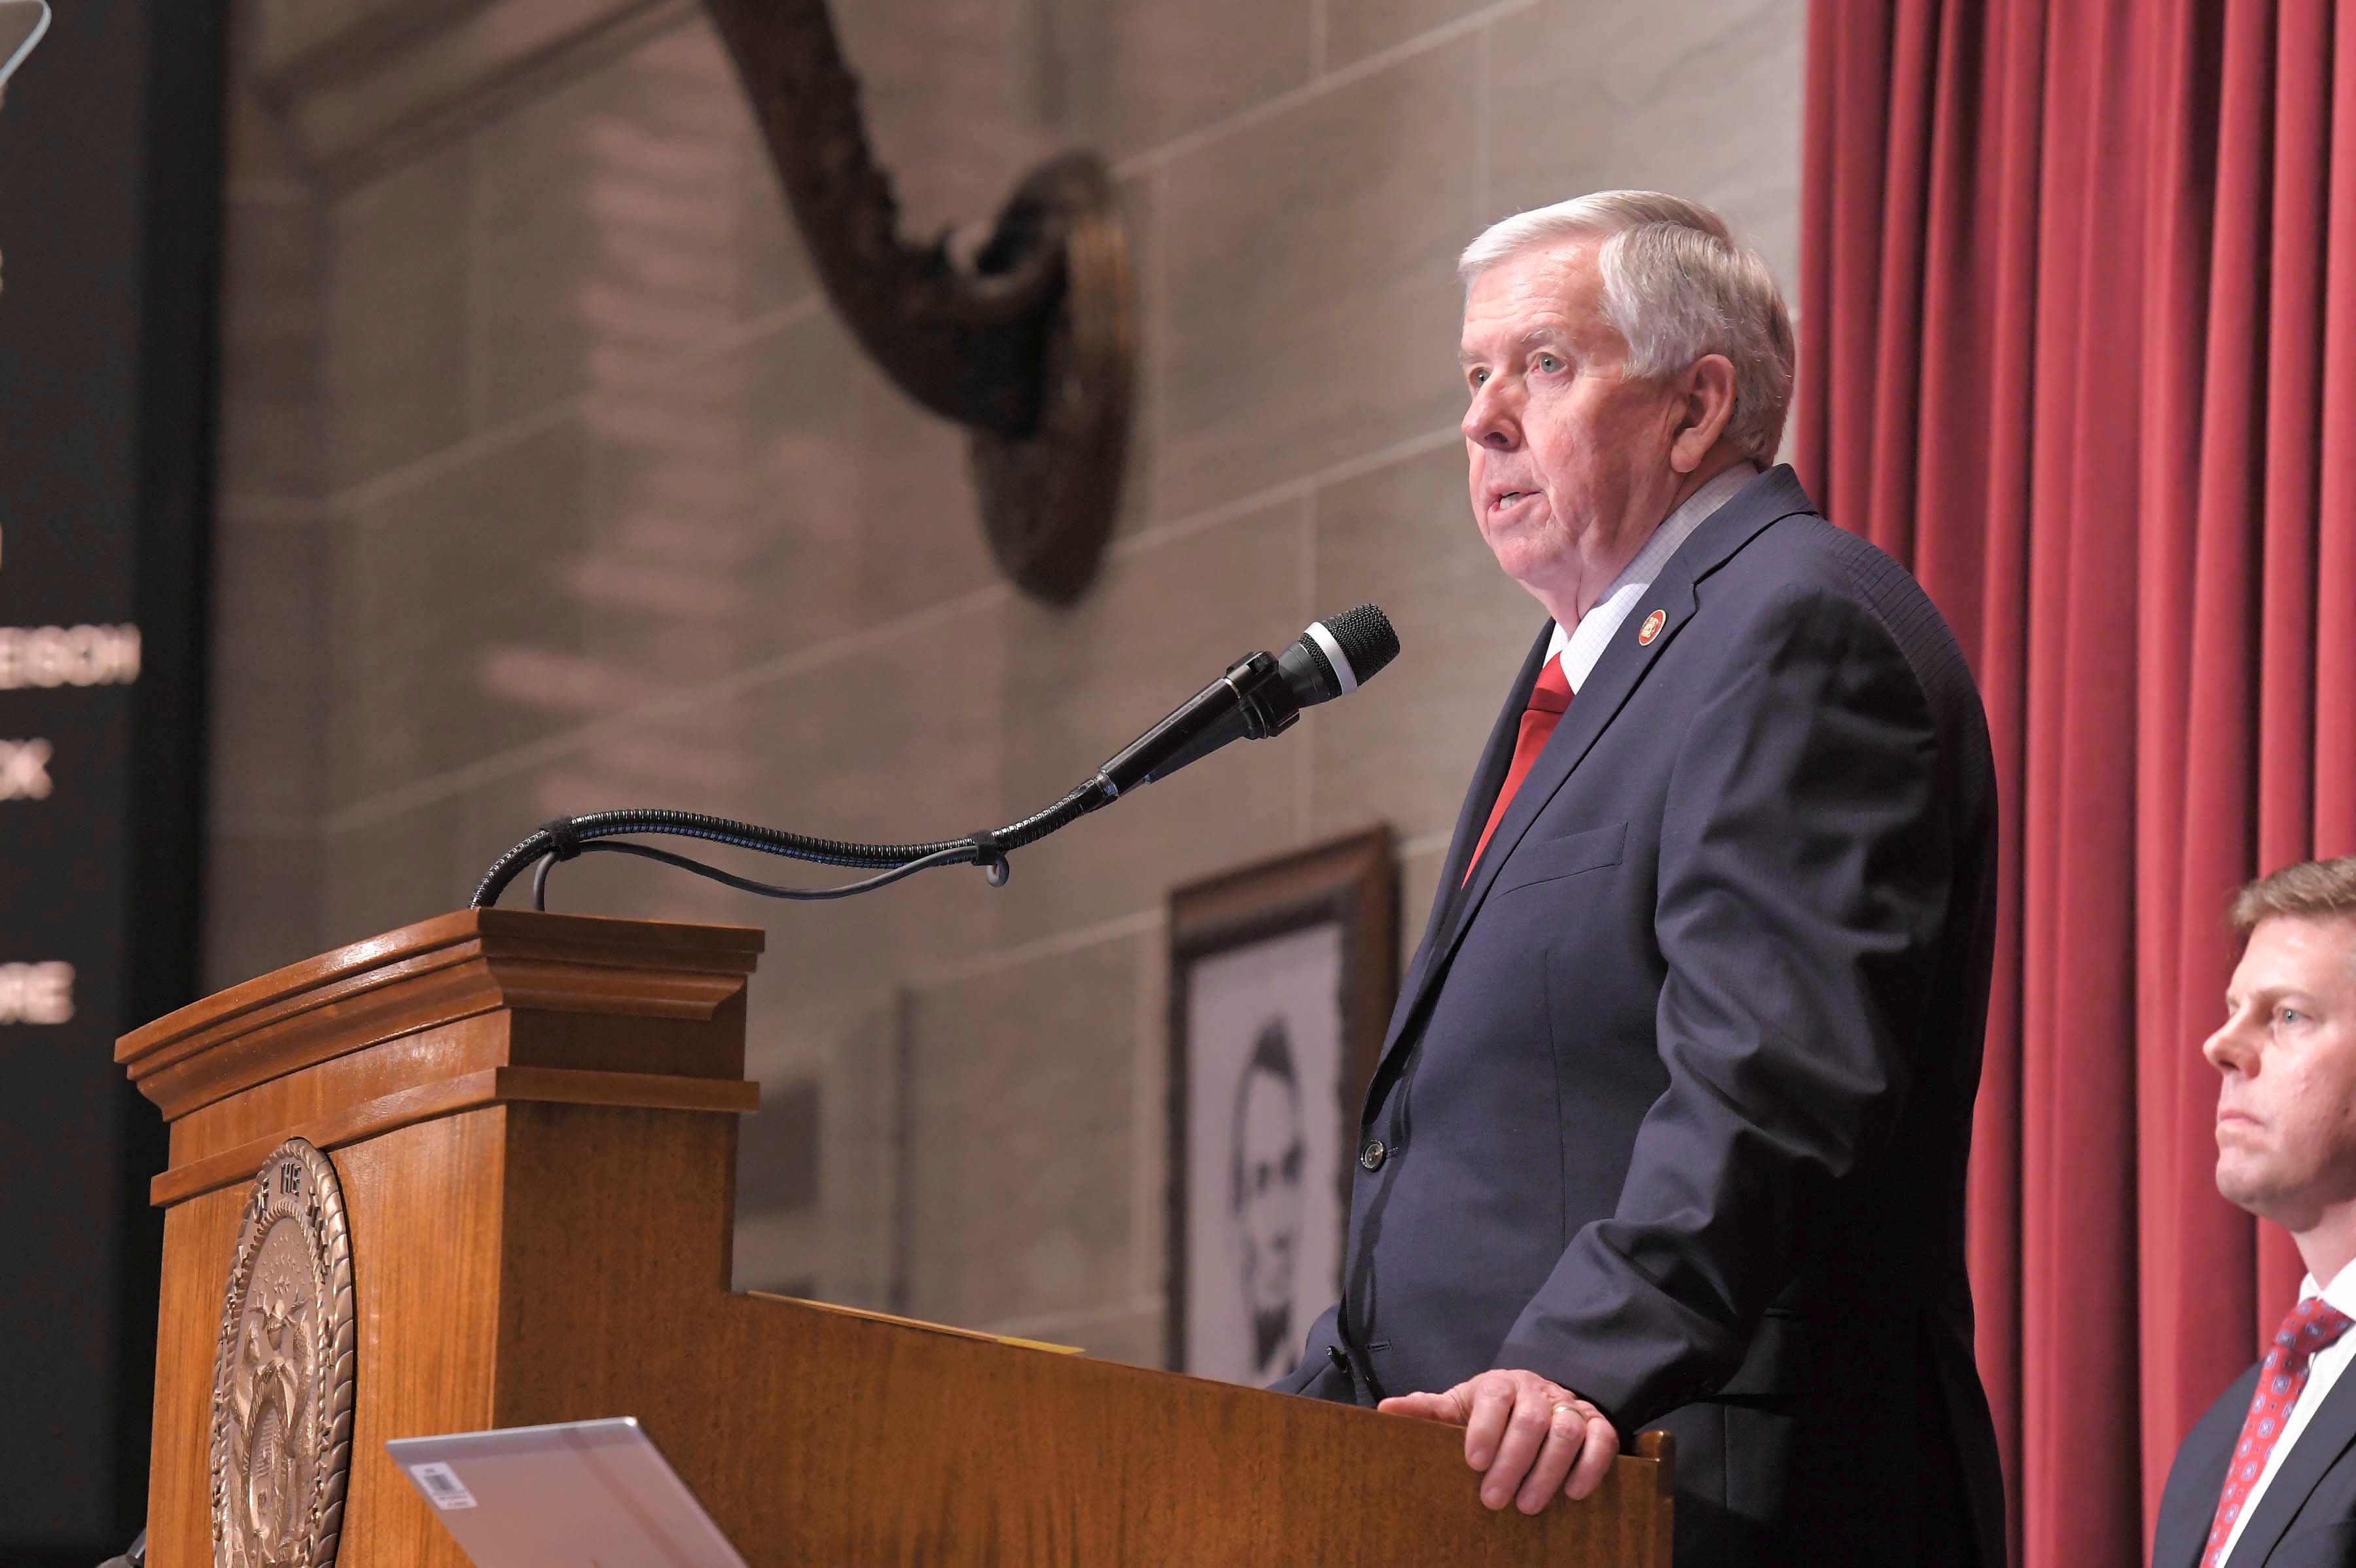 Gov. Mike Parson signs bill denying Medicaid funds from abortion providers or affiliates